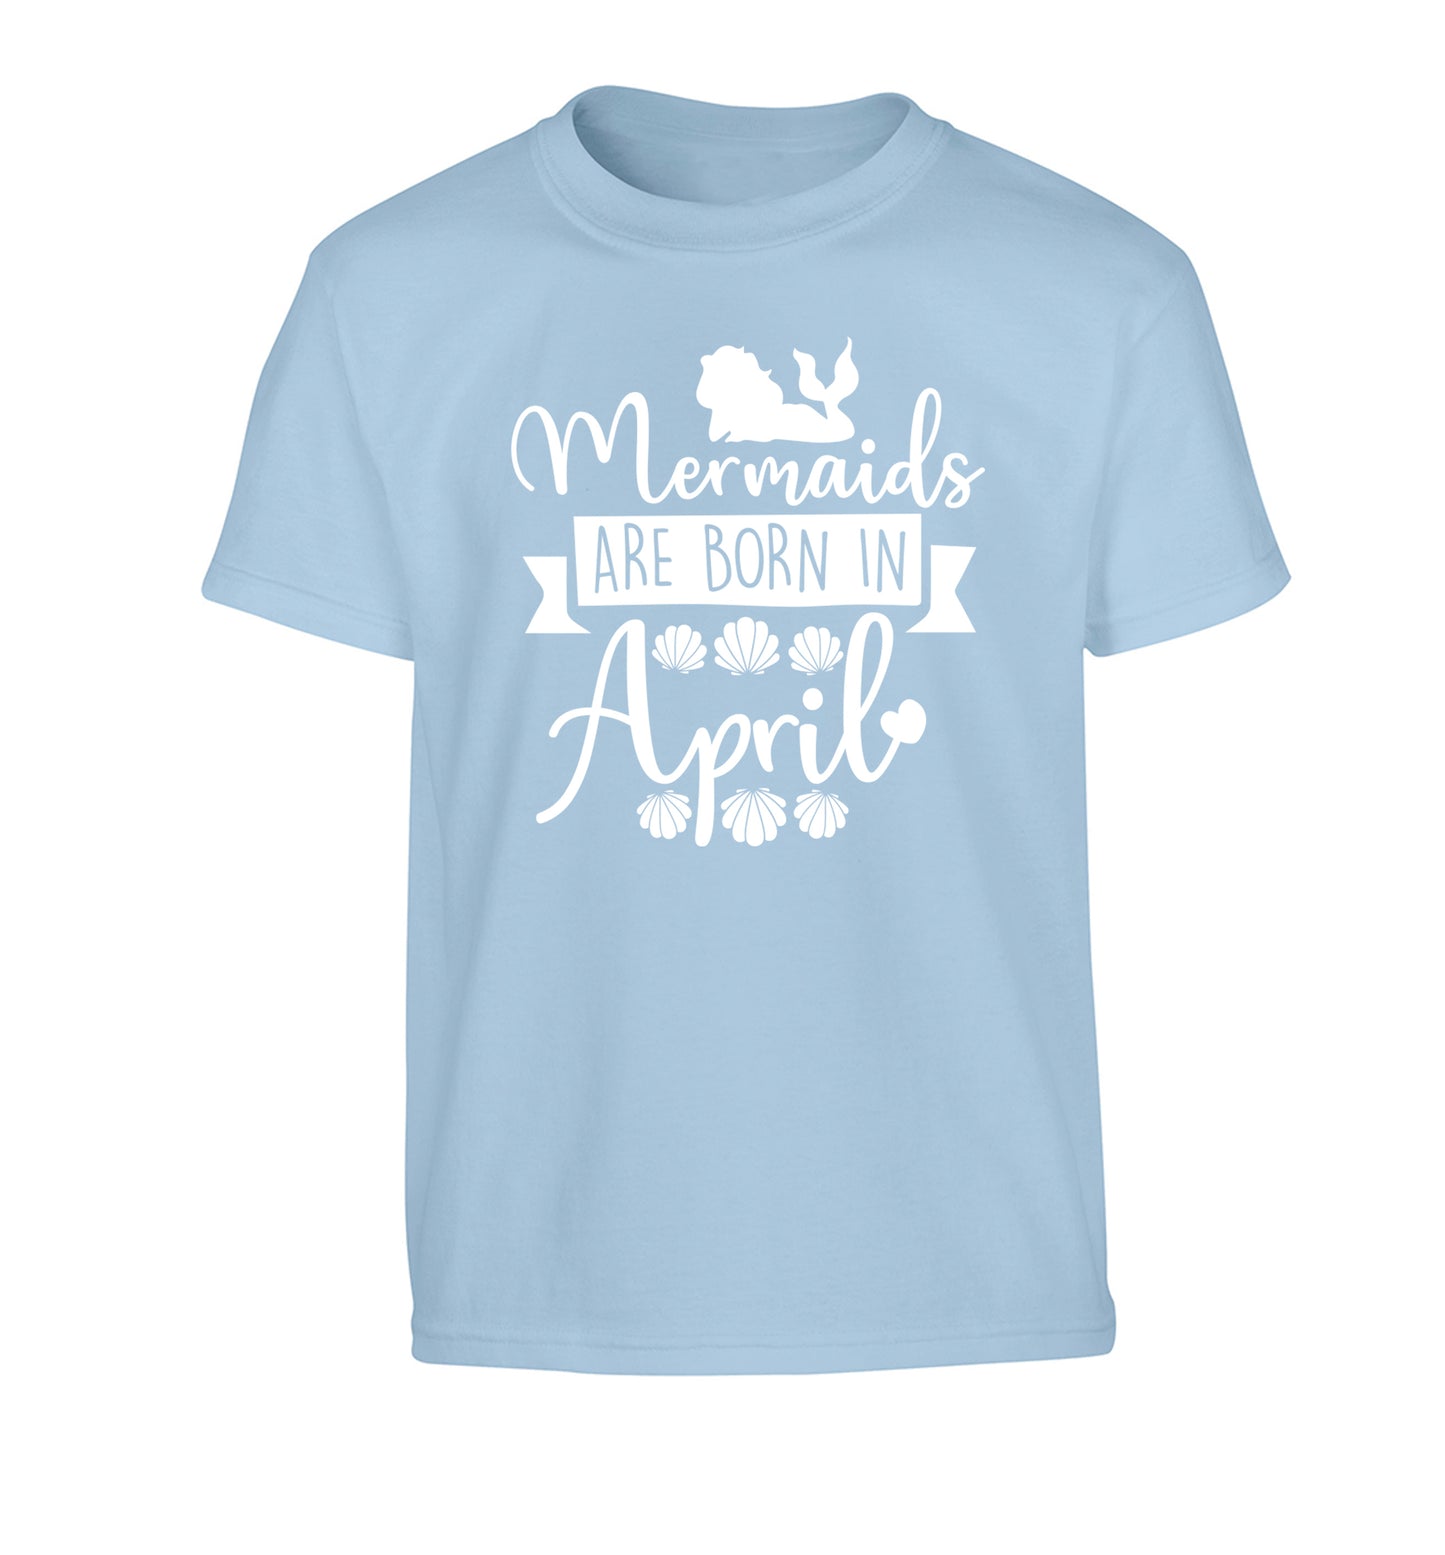 Mermaids are born in April Children's light blue Tshirt 12-13 Years